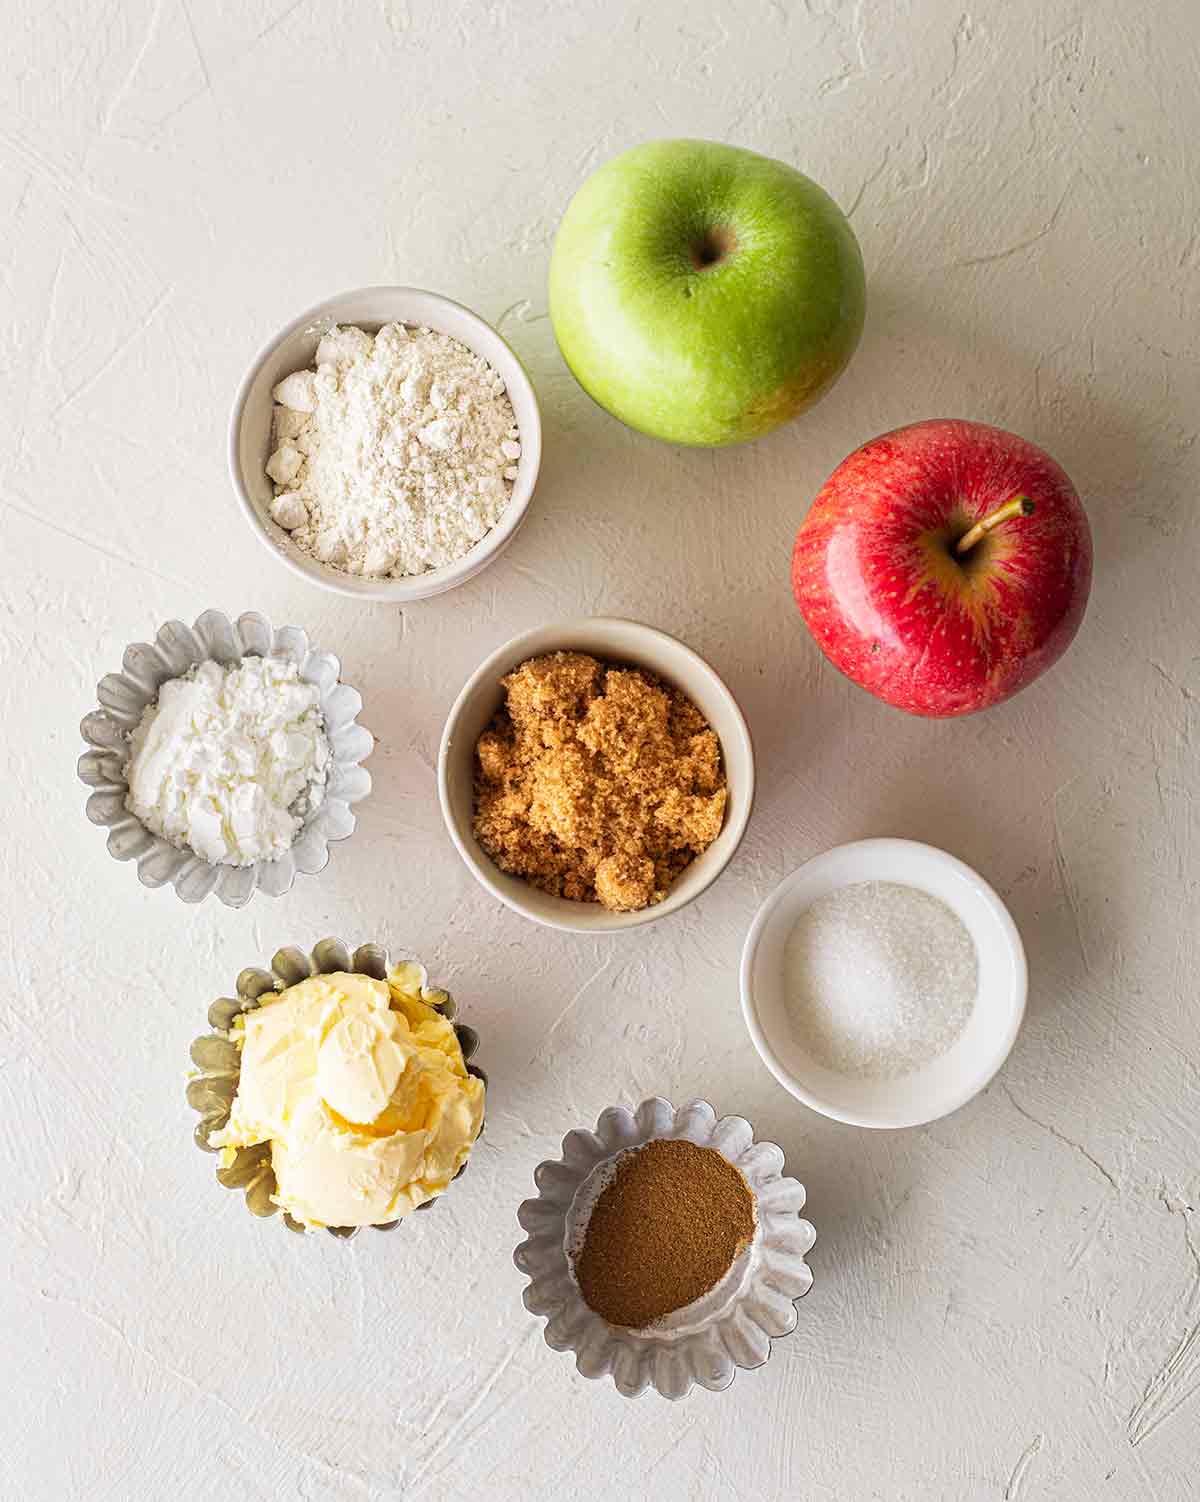 Flatlay of ingredients for vegan apple pie including: apples, flour, corn starch, brown sugar, regular sugar, vegan butter and spices